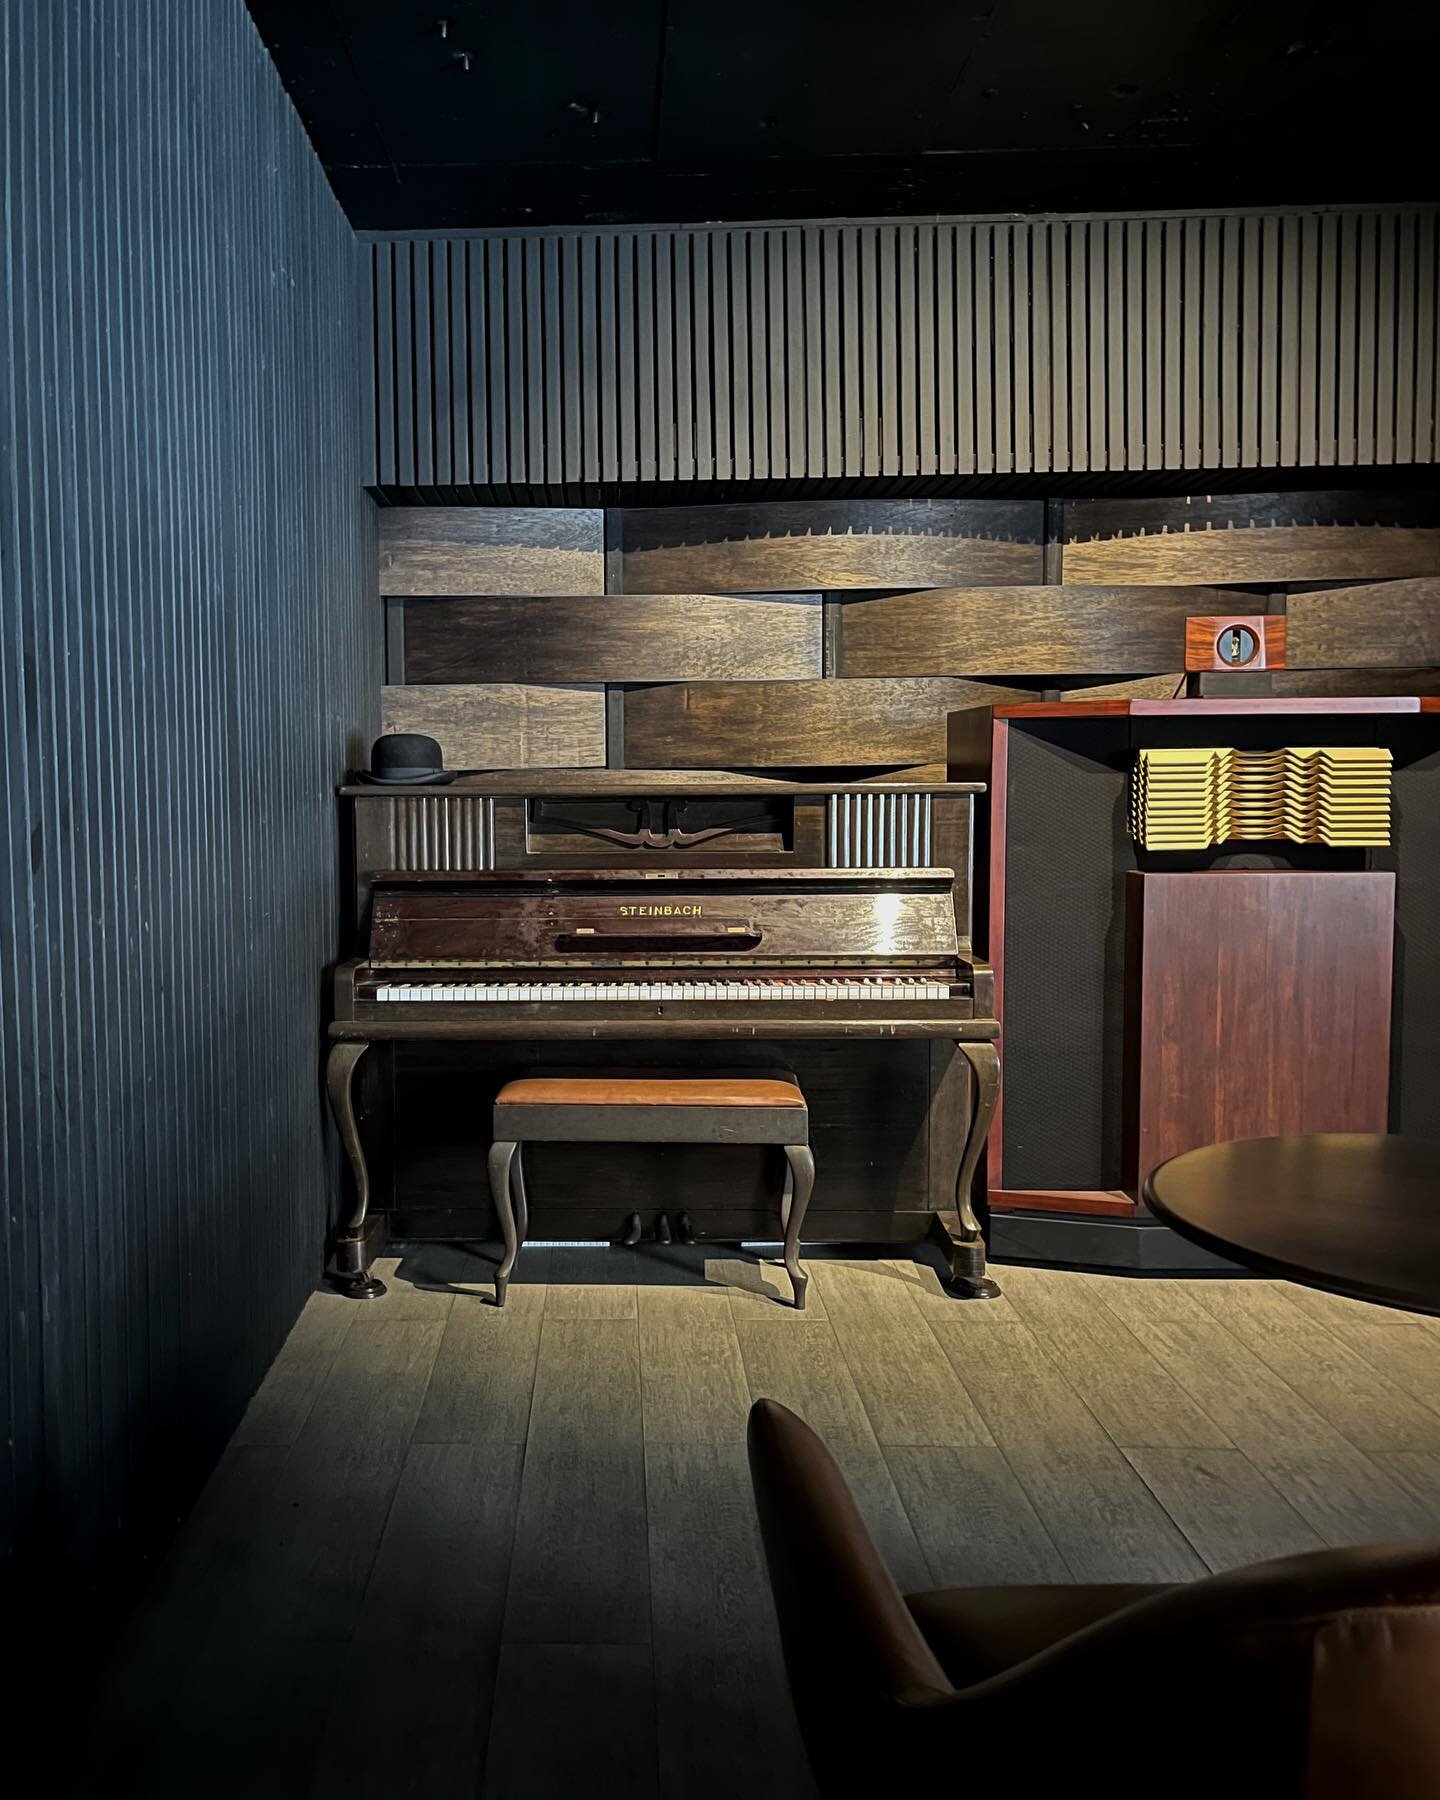 Have you seen our latest addition to the bar? The piano was my grandfather&rsquo;s wedding gift to my grandmother in 1965, making the piano 58 years old&mdash;older than their eldest son! Licensed to be built in the Philippines, the piano&rsquo;s met